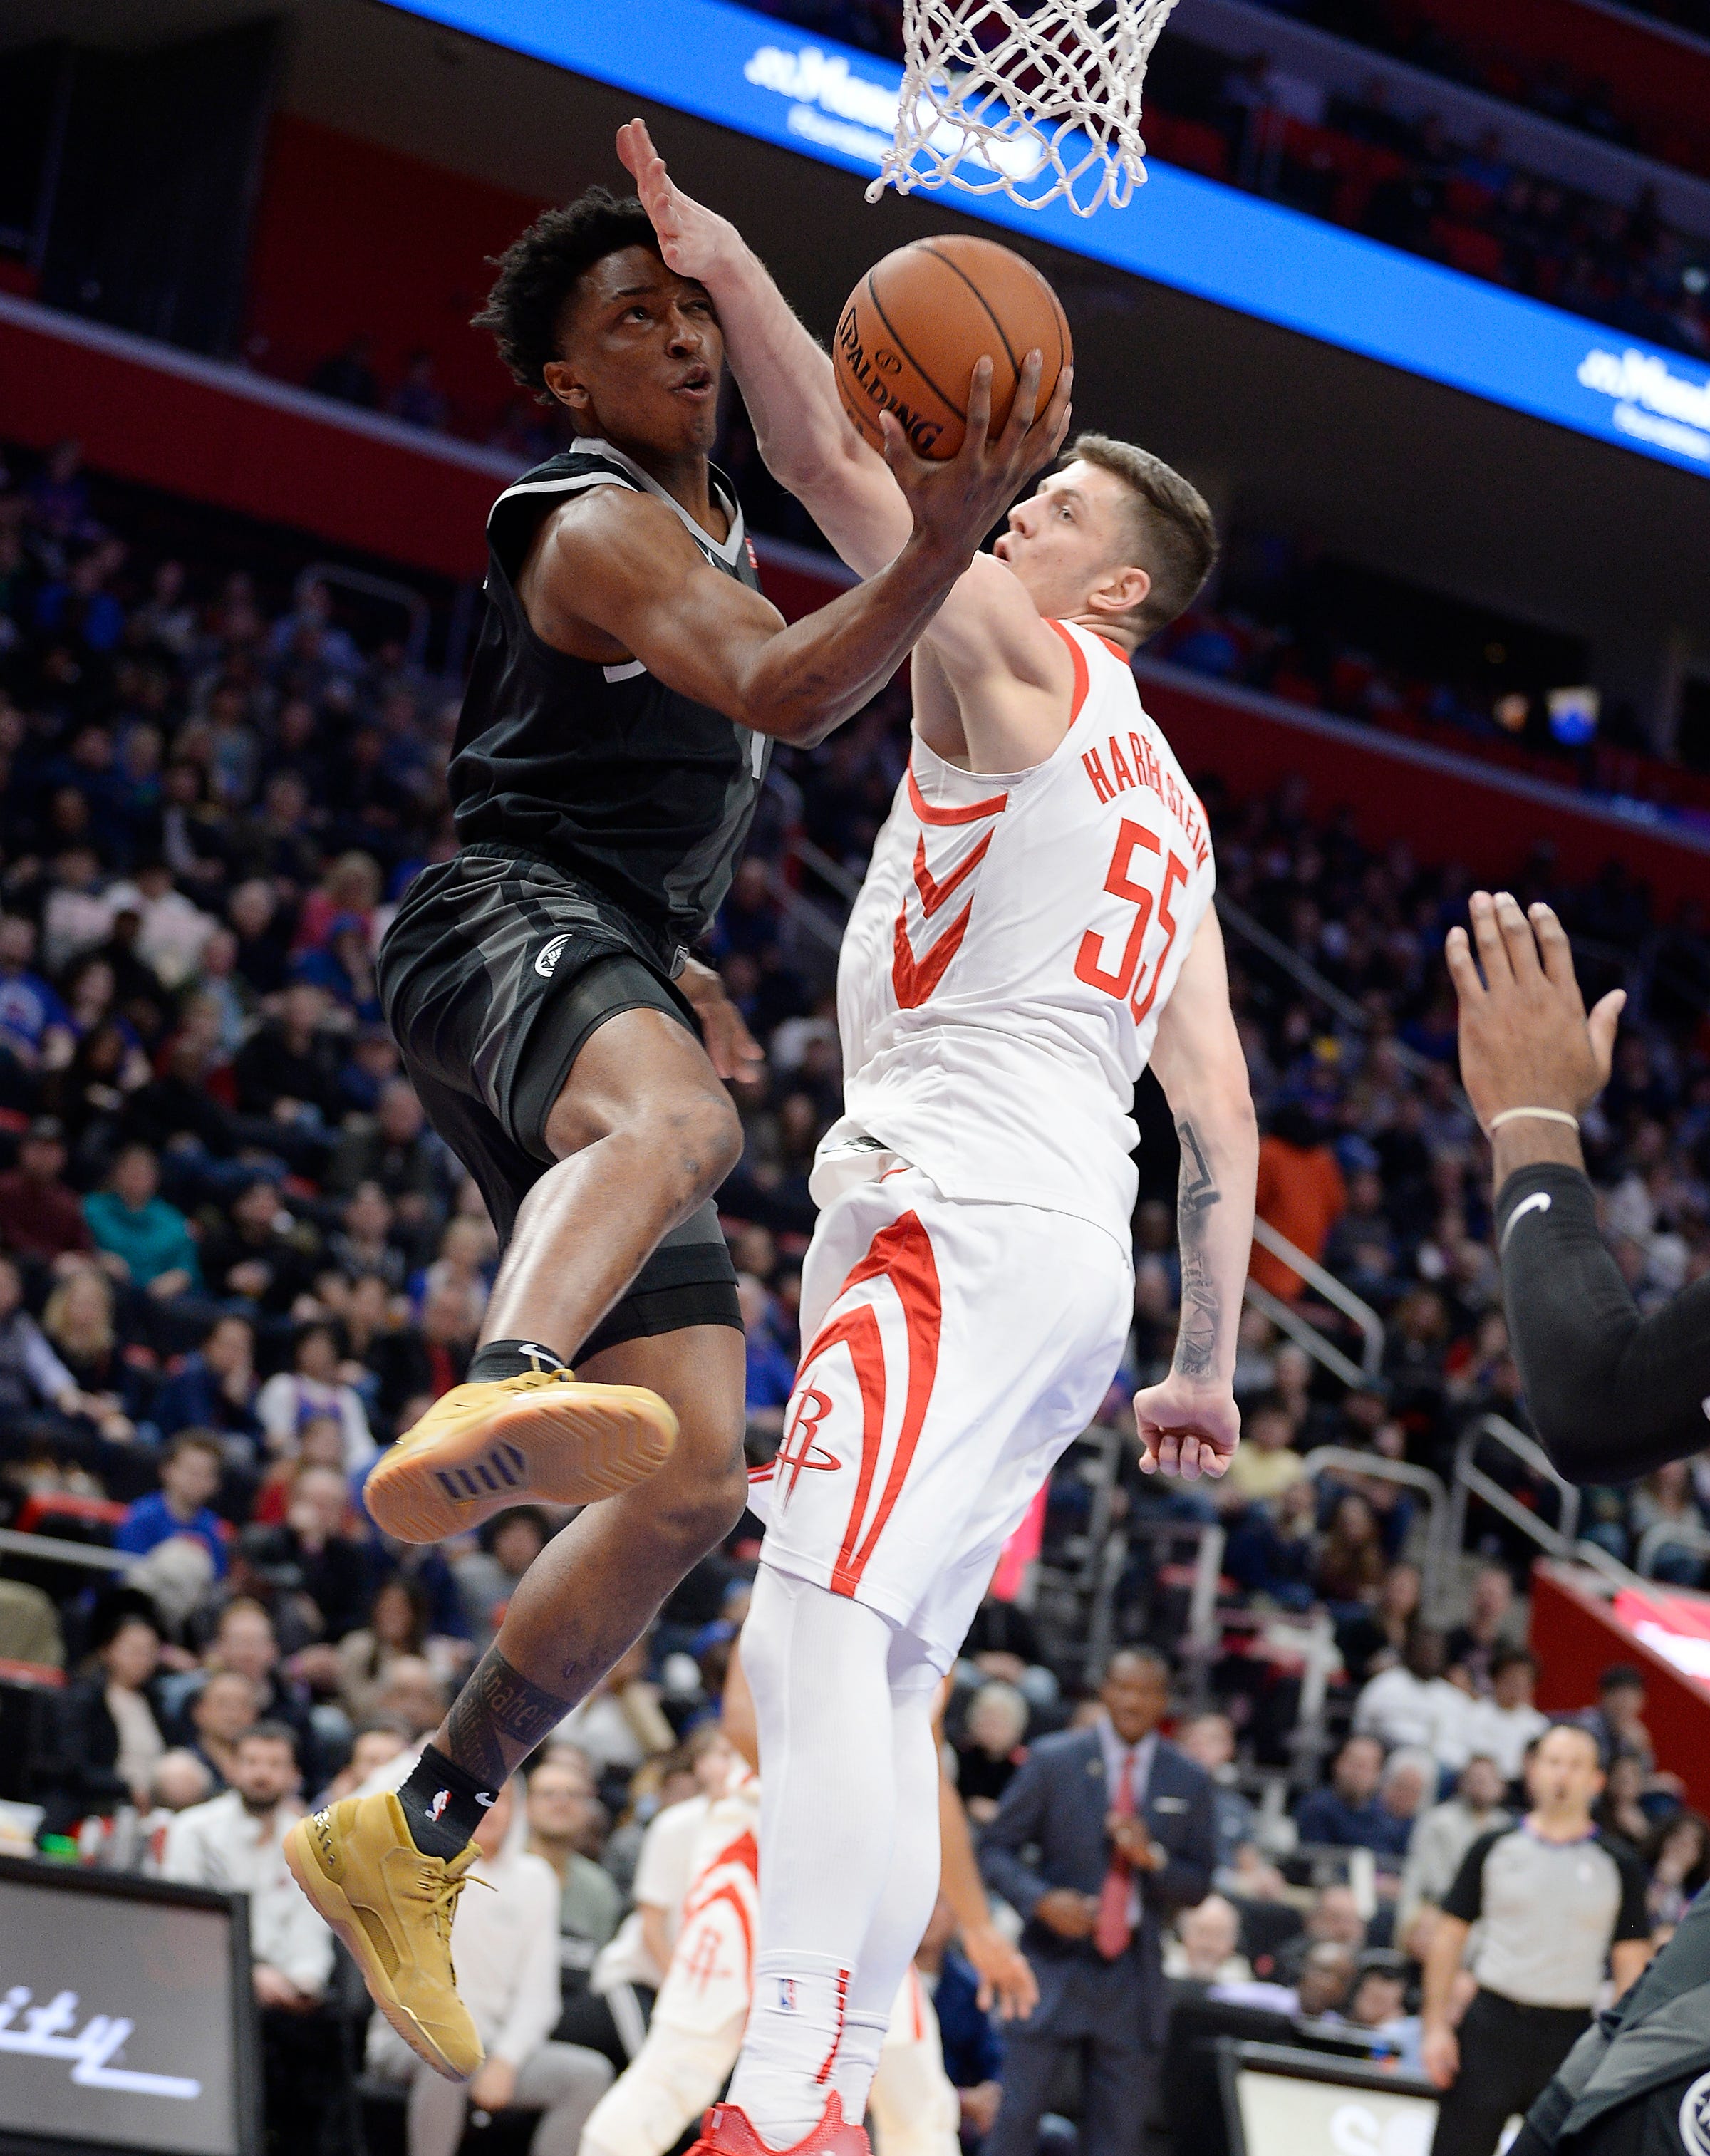 Pistons' Stanley Johnson shoots over Rockets' Isaiah Hartenstein in the second quarter.s